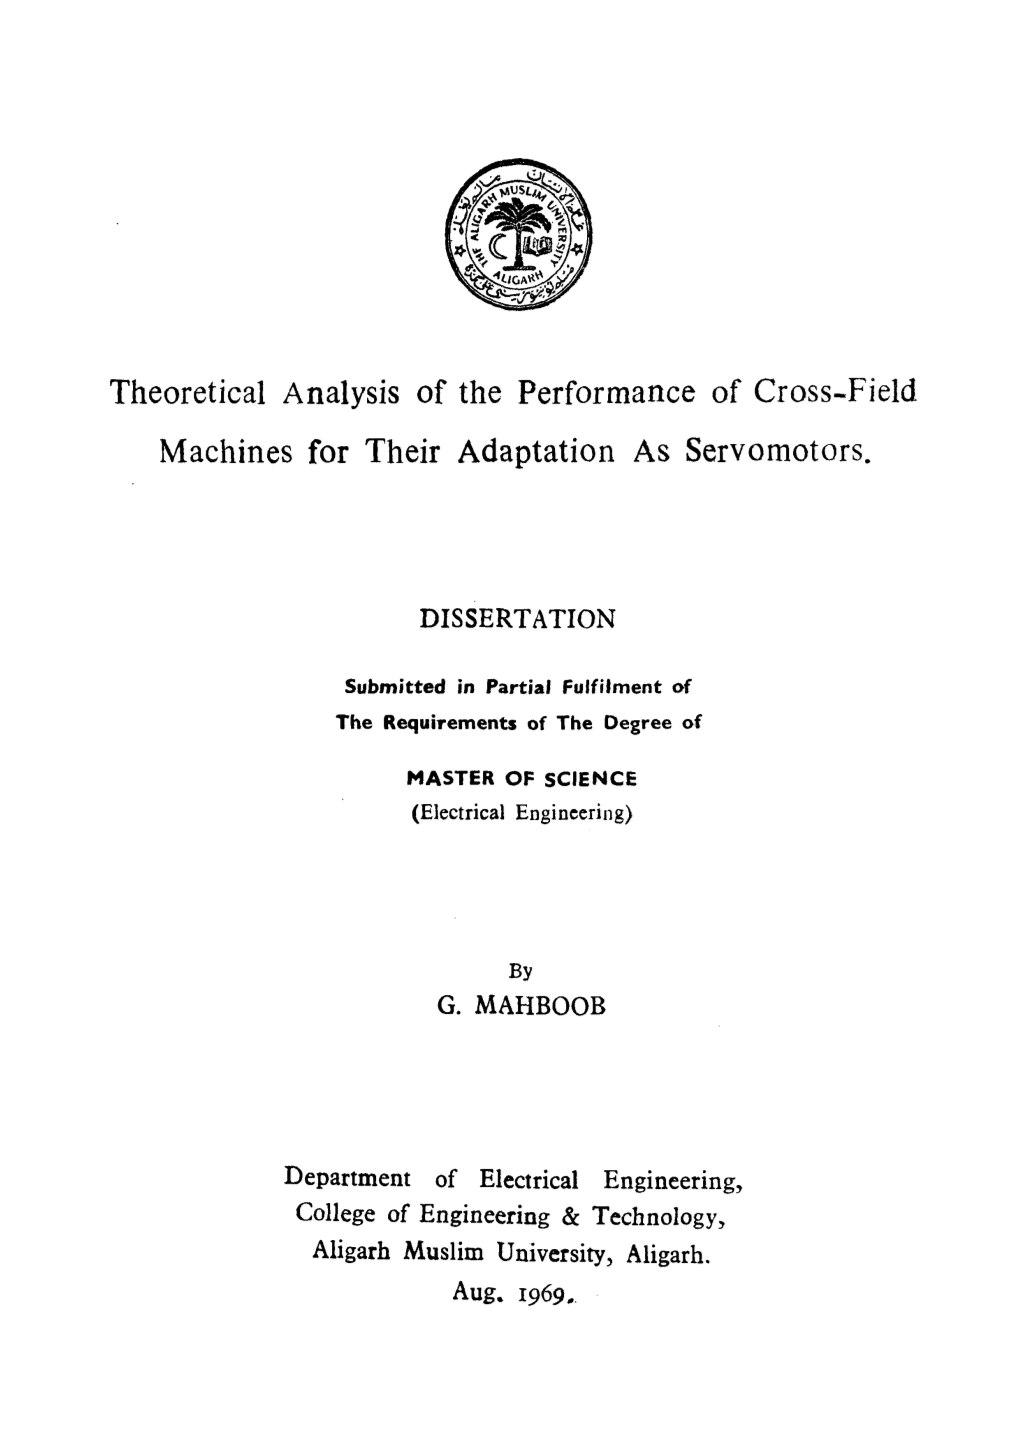 Theoretical Analysis of the Performance of Cross-Field Machines for Their Adaptation As Servomotors